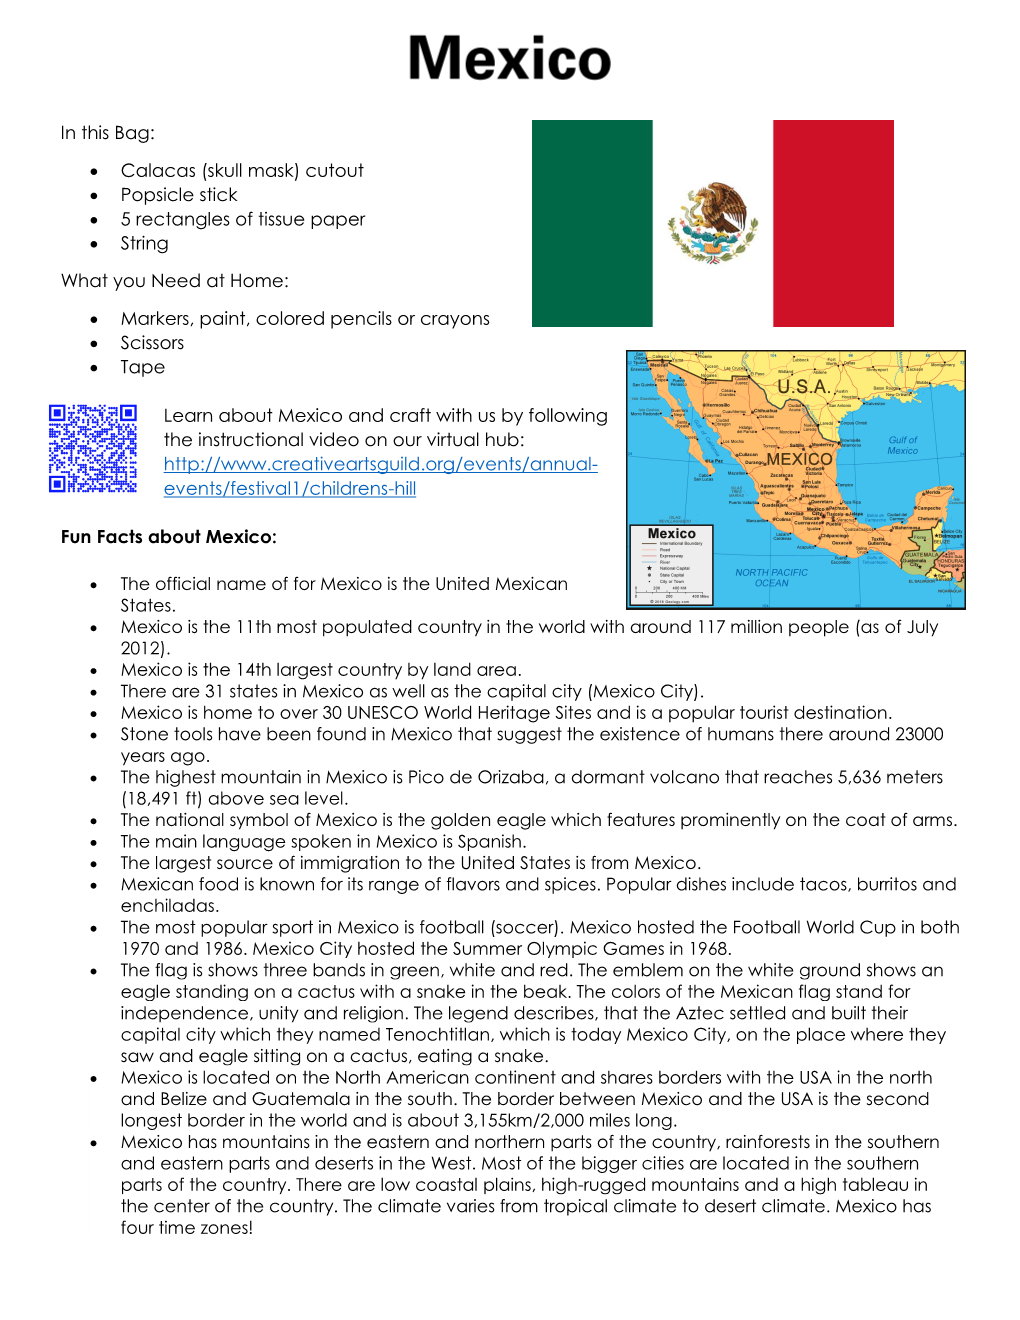 Explore Mexico with Fun Facts